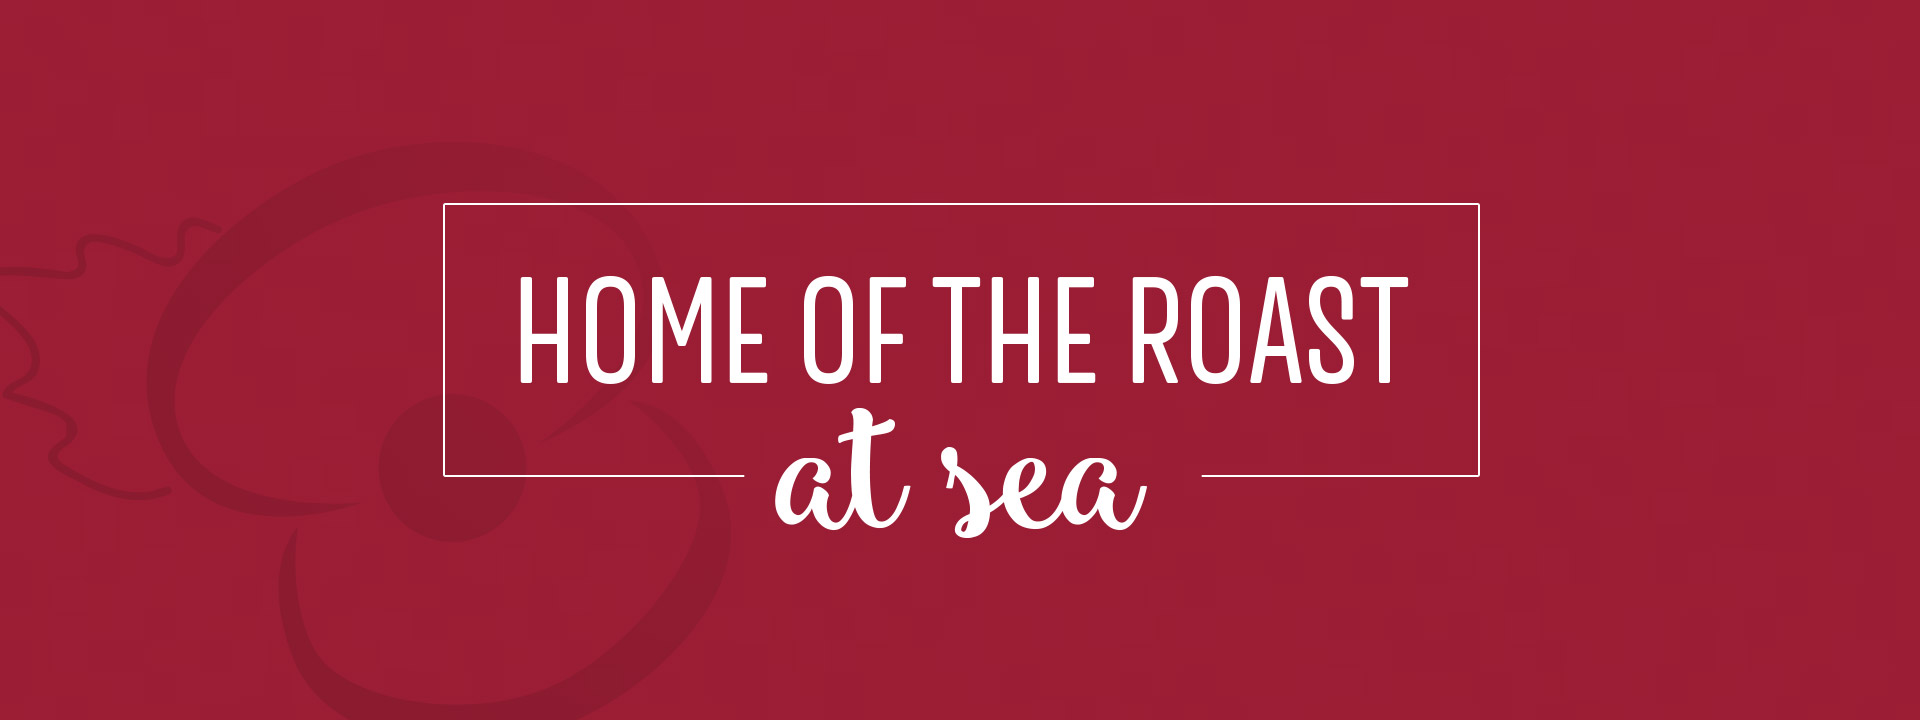 Home of the roast at sea